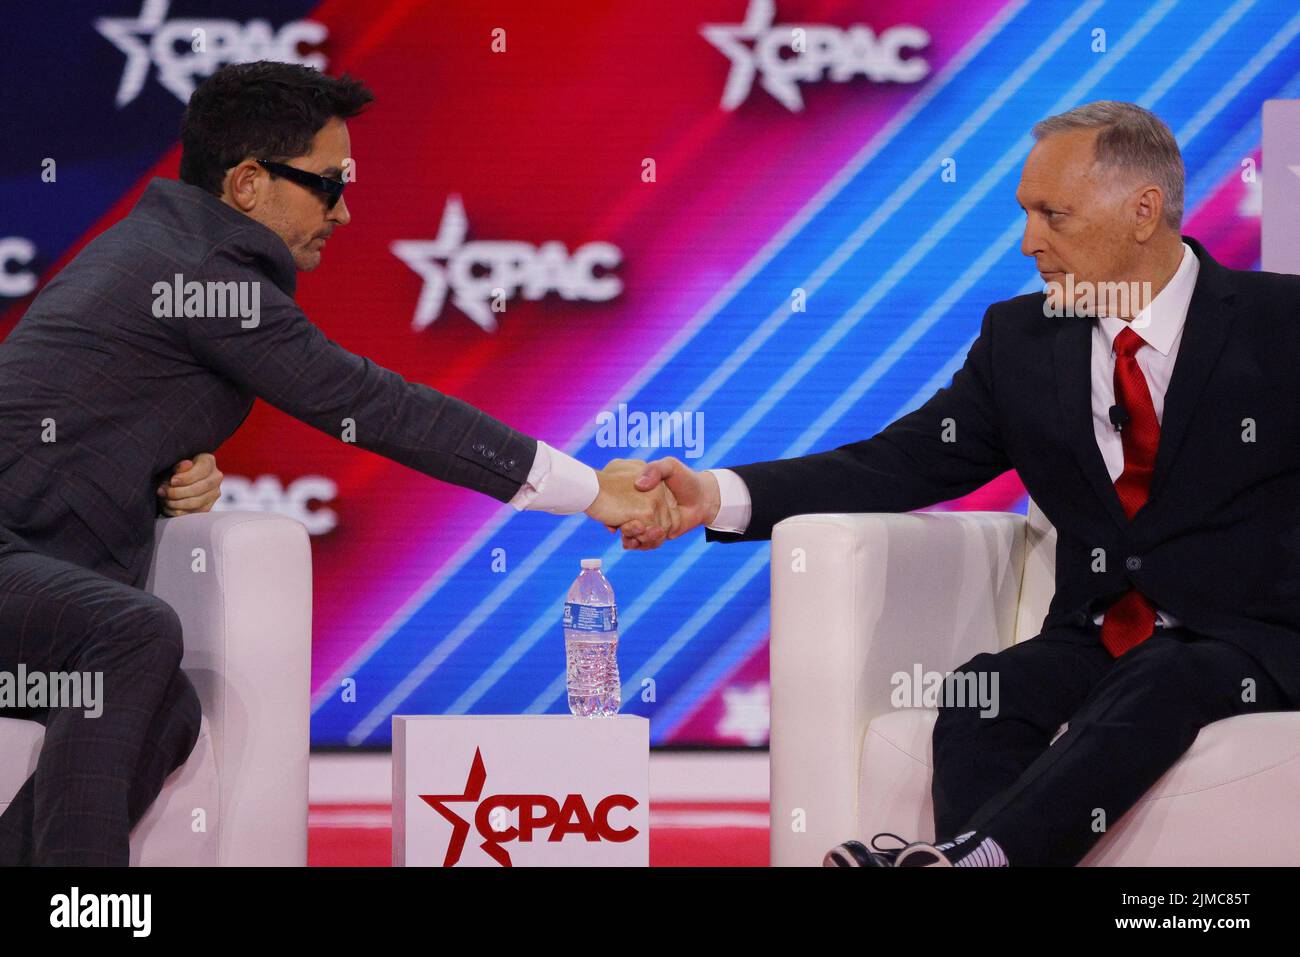 Brandon Straka, who was convicted on charges linked the January 6 attacks on the U.S. Capitol, shakes hands with U.S. Representative Andy Biggs (R-AZ) onstage at the Conservative Political Action Conference (CPAC) in Dallas, Texas, U.S., August 5, 2022.  REUTERS/Brian Snyder Stock Photo